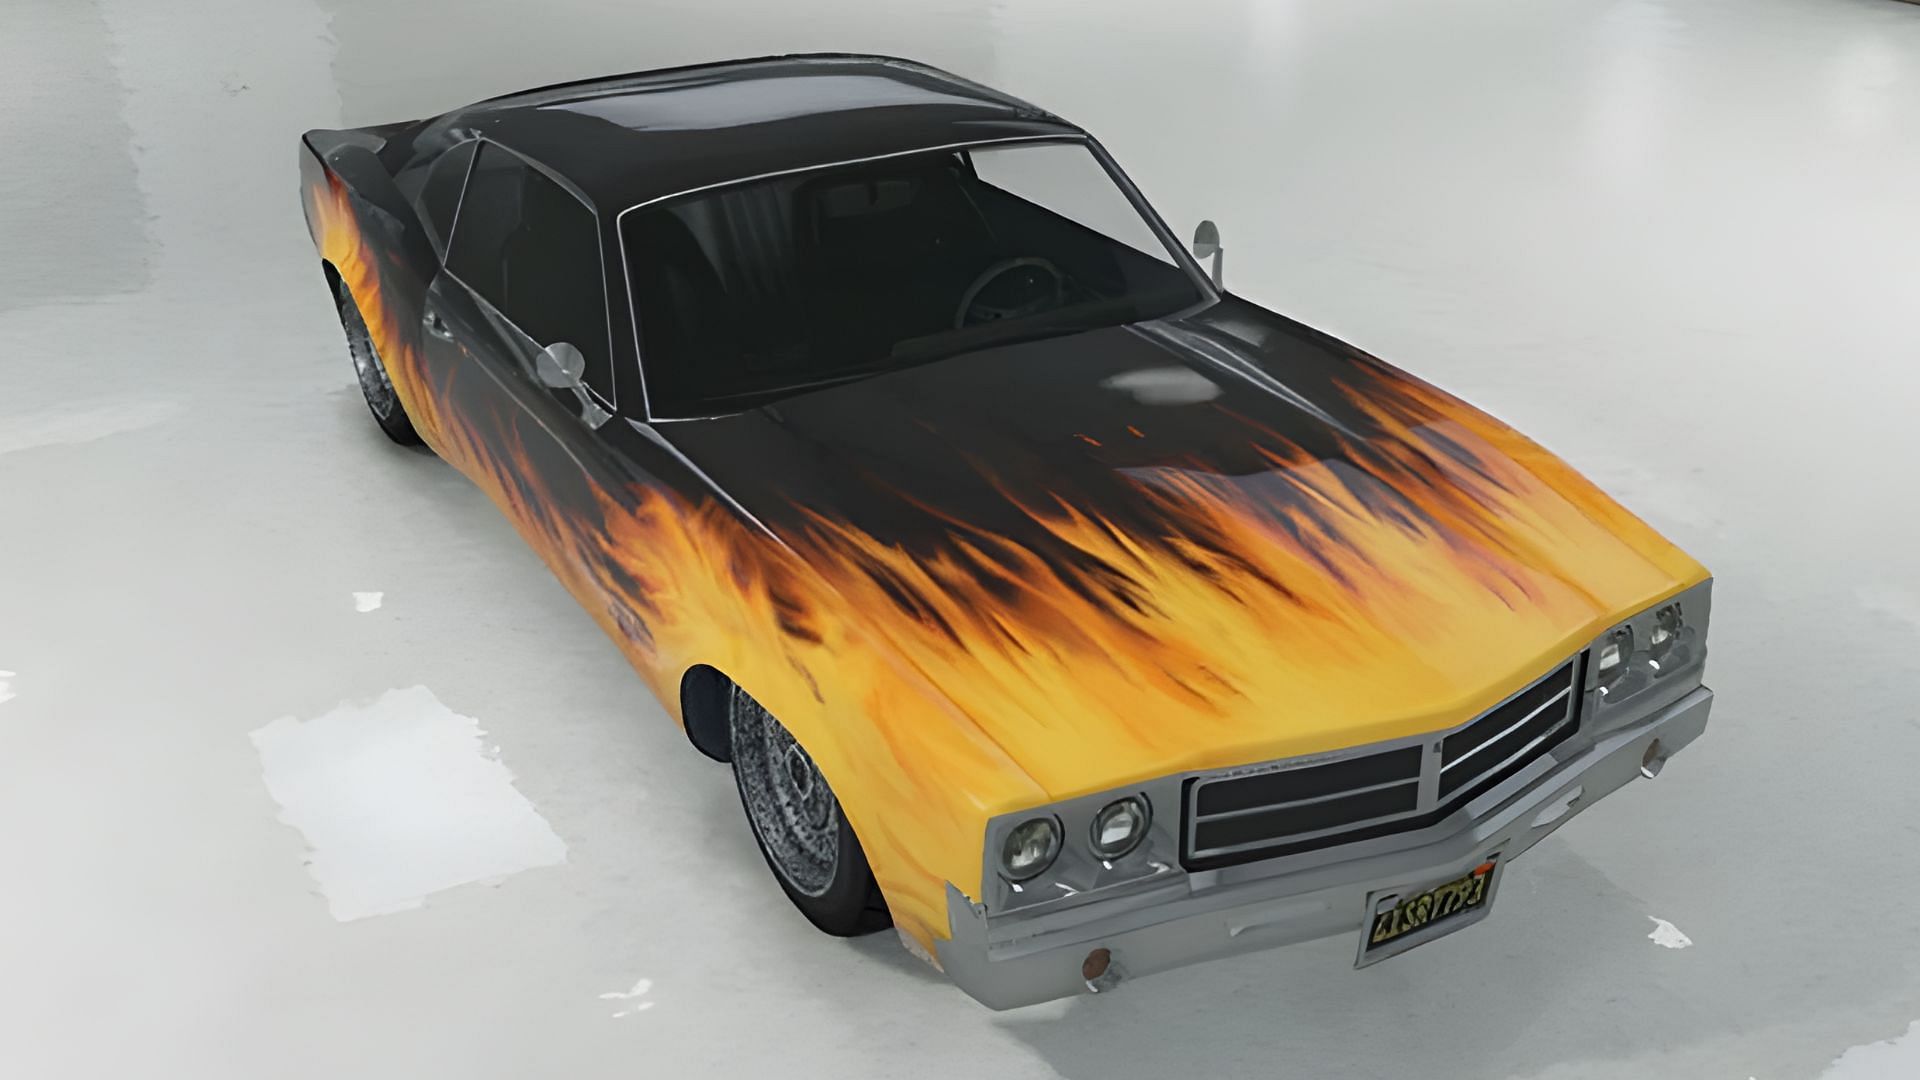 GTA 5 Online 1.14 Hipster Update: Hydraulics Mod, Vehicle Mod, Weapon Mod,  Rare Modded Cars and Ten Secret Cars Revealed